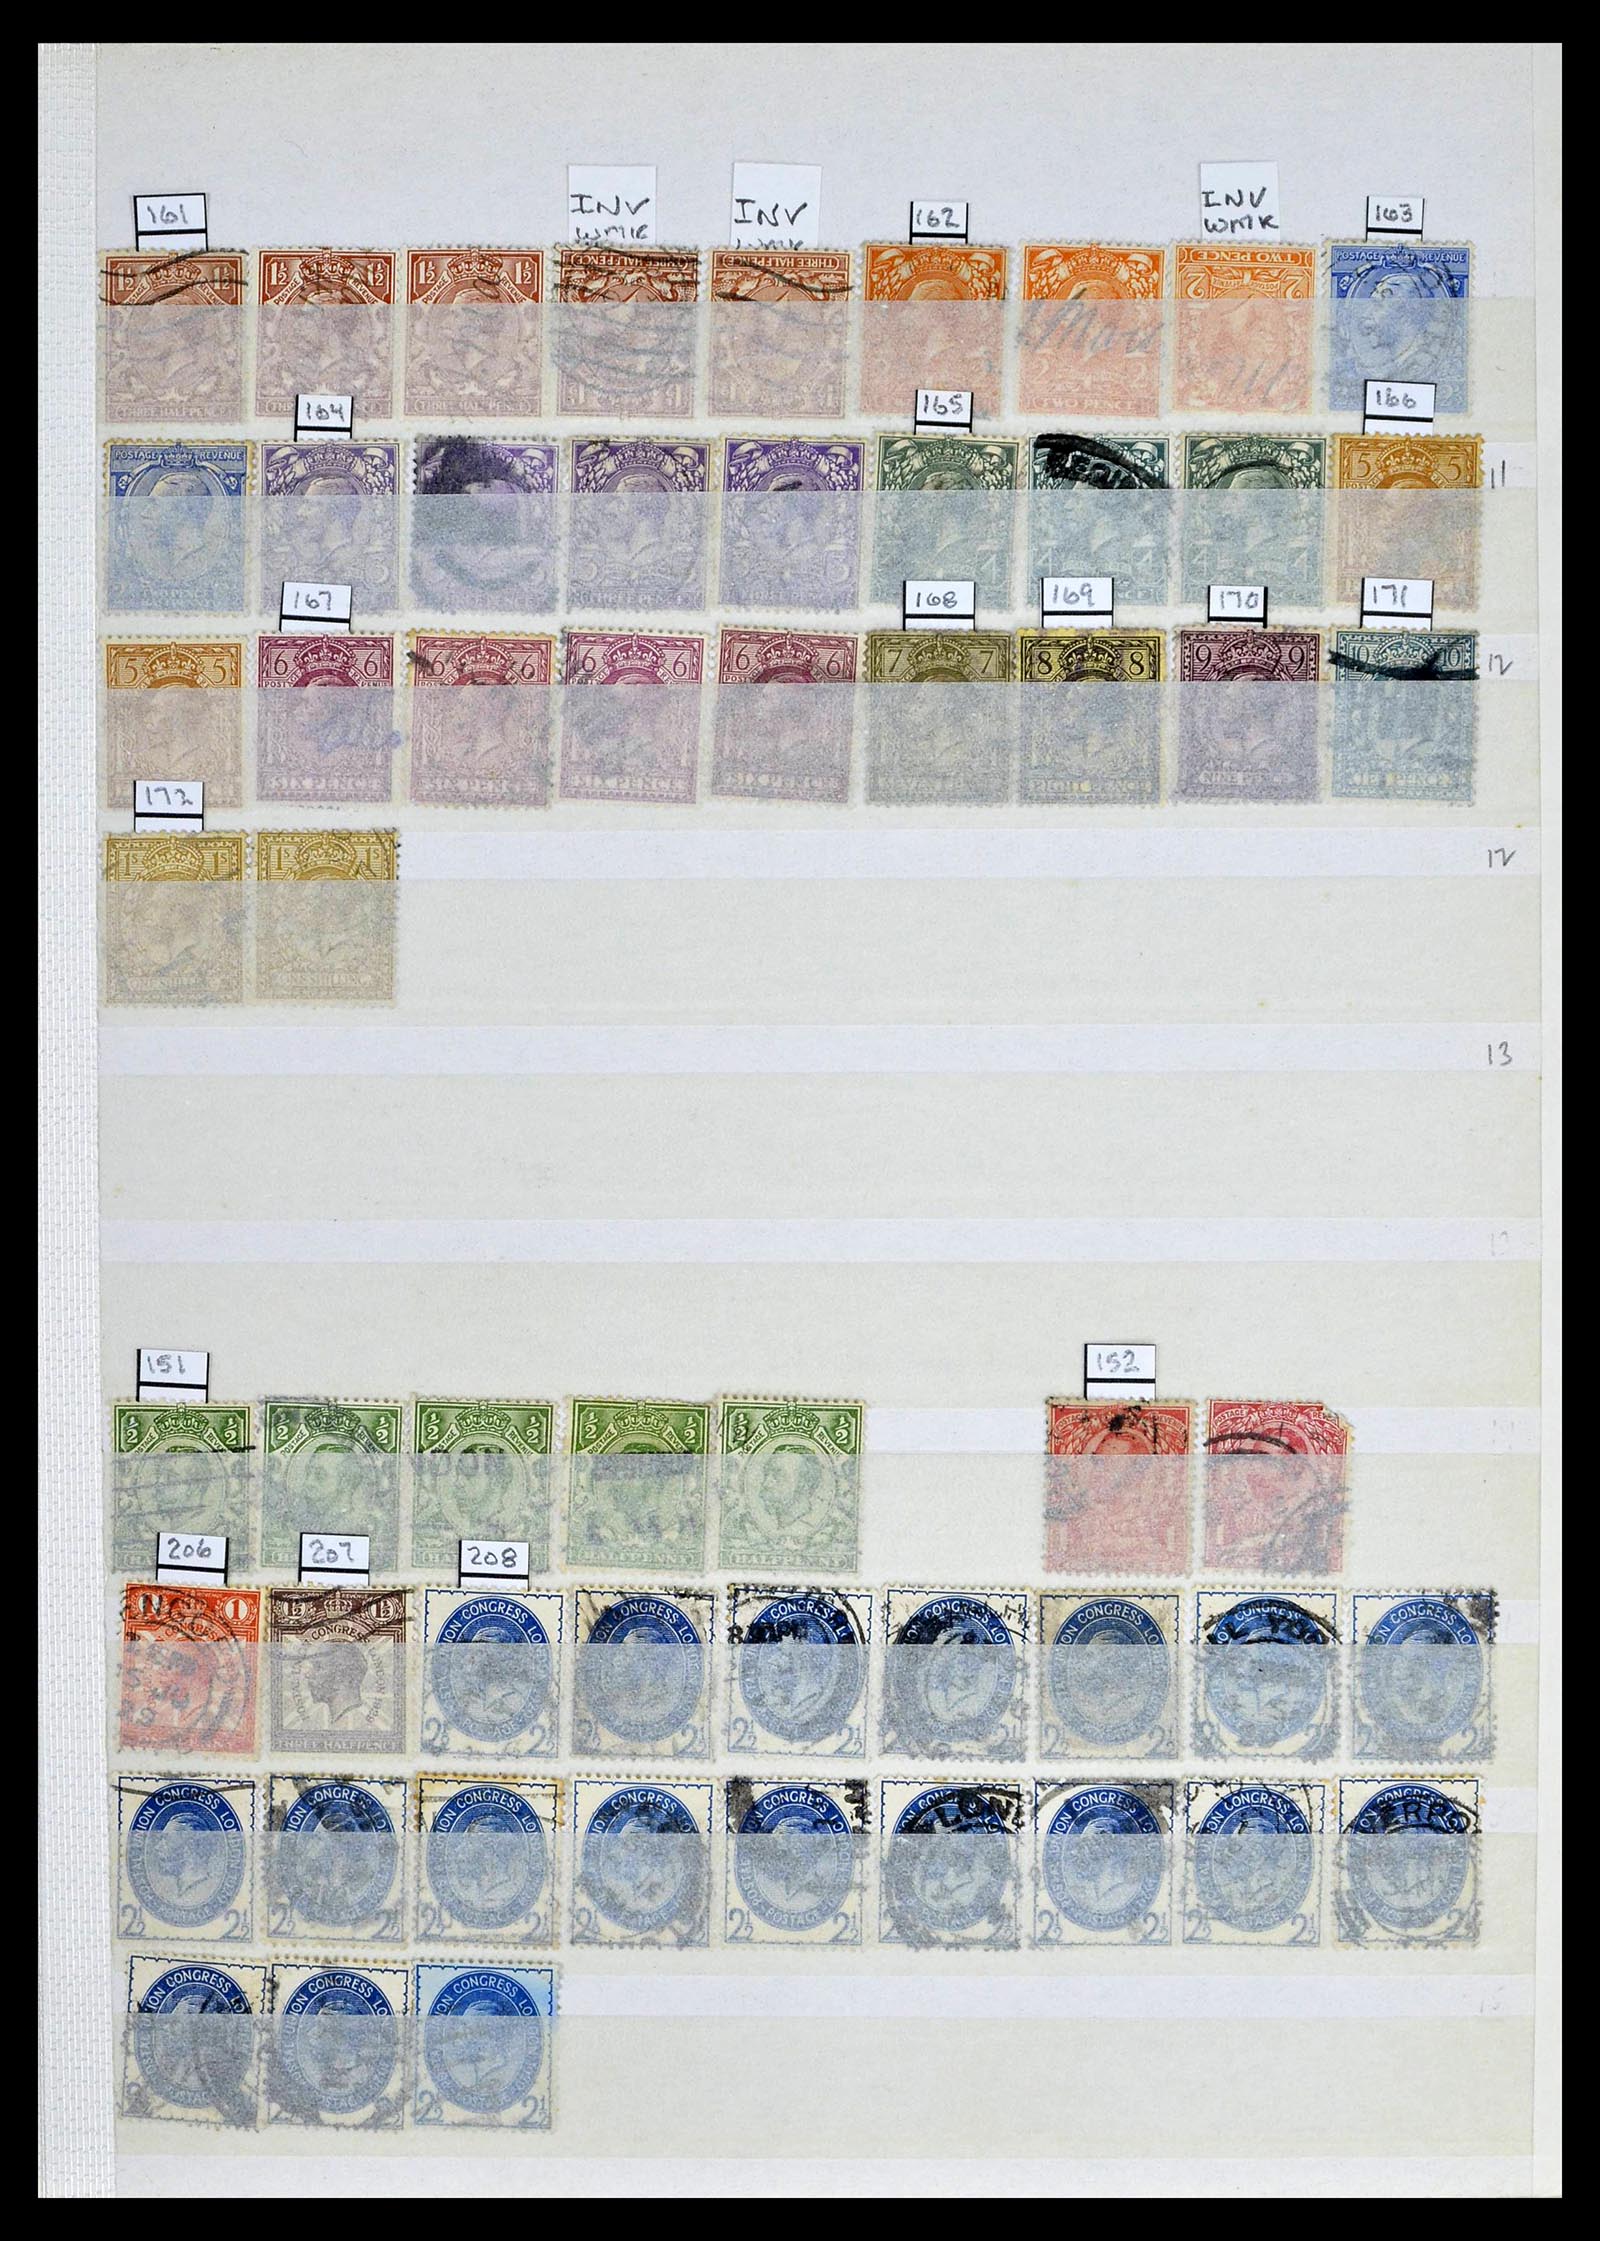 39196 0019 - Stamp collection 39196 Great Britain 1844-1955.